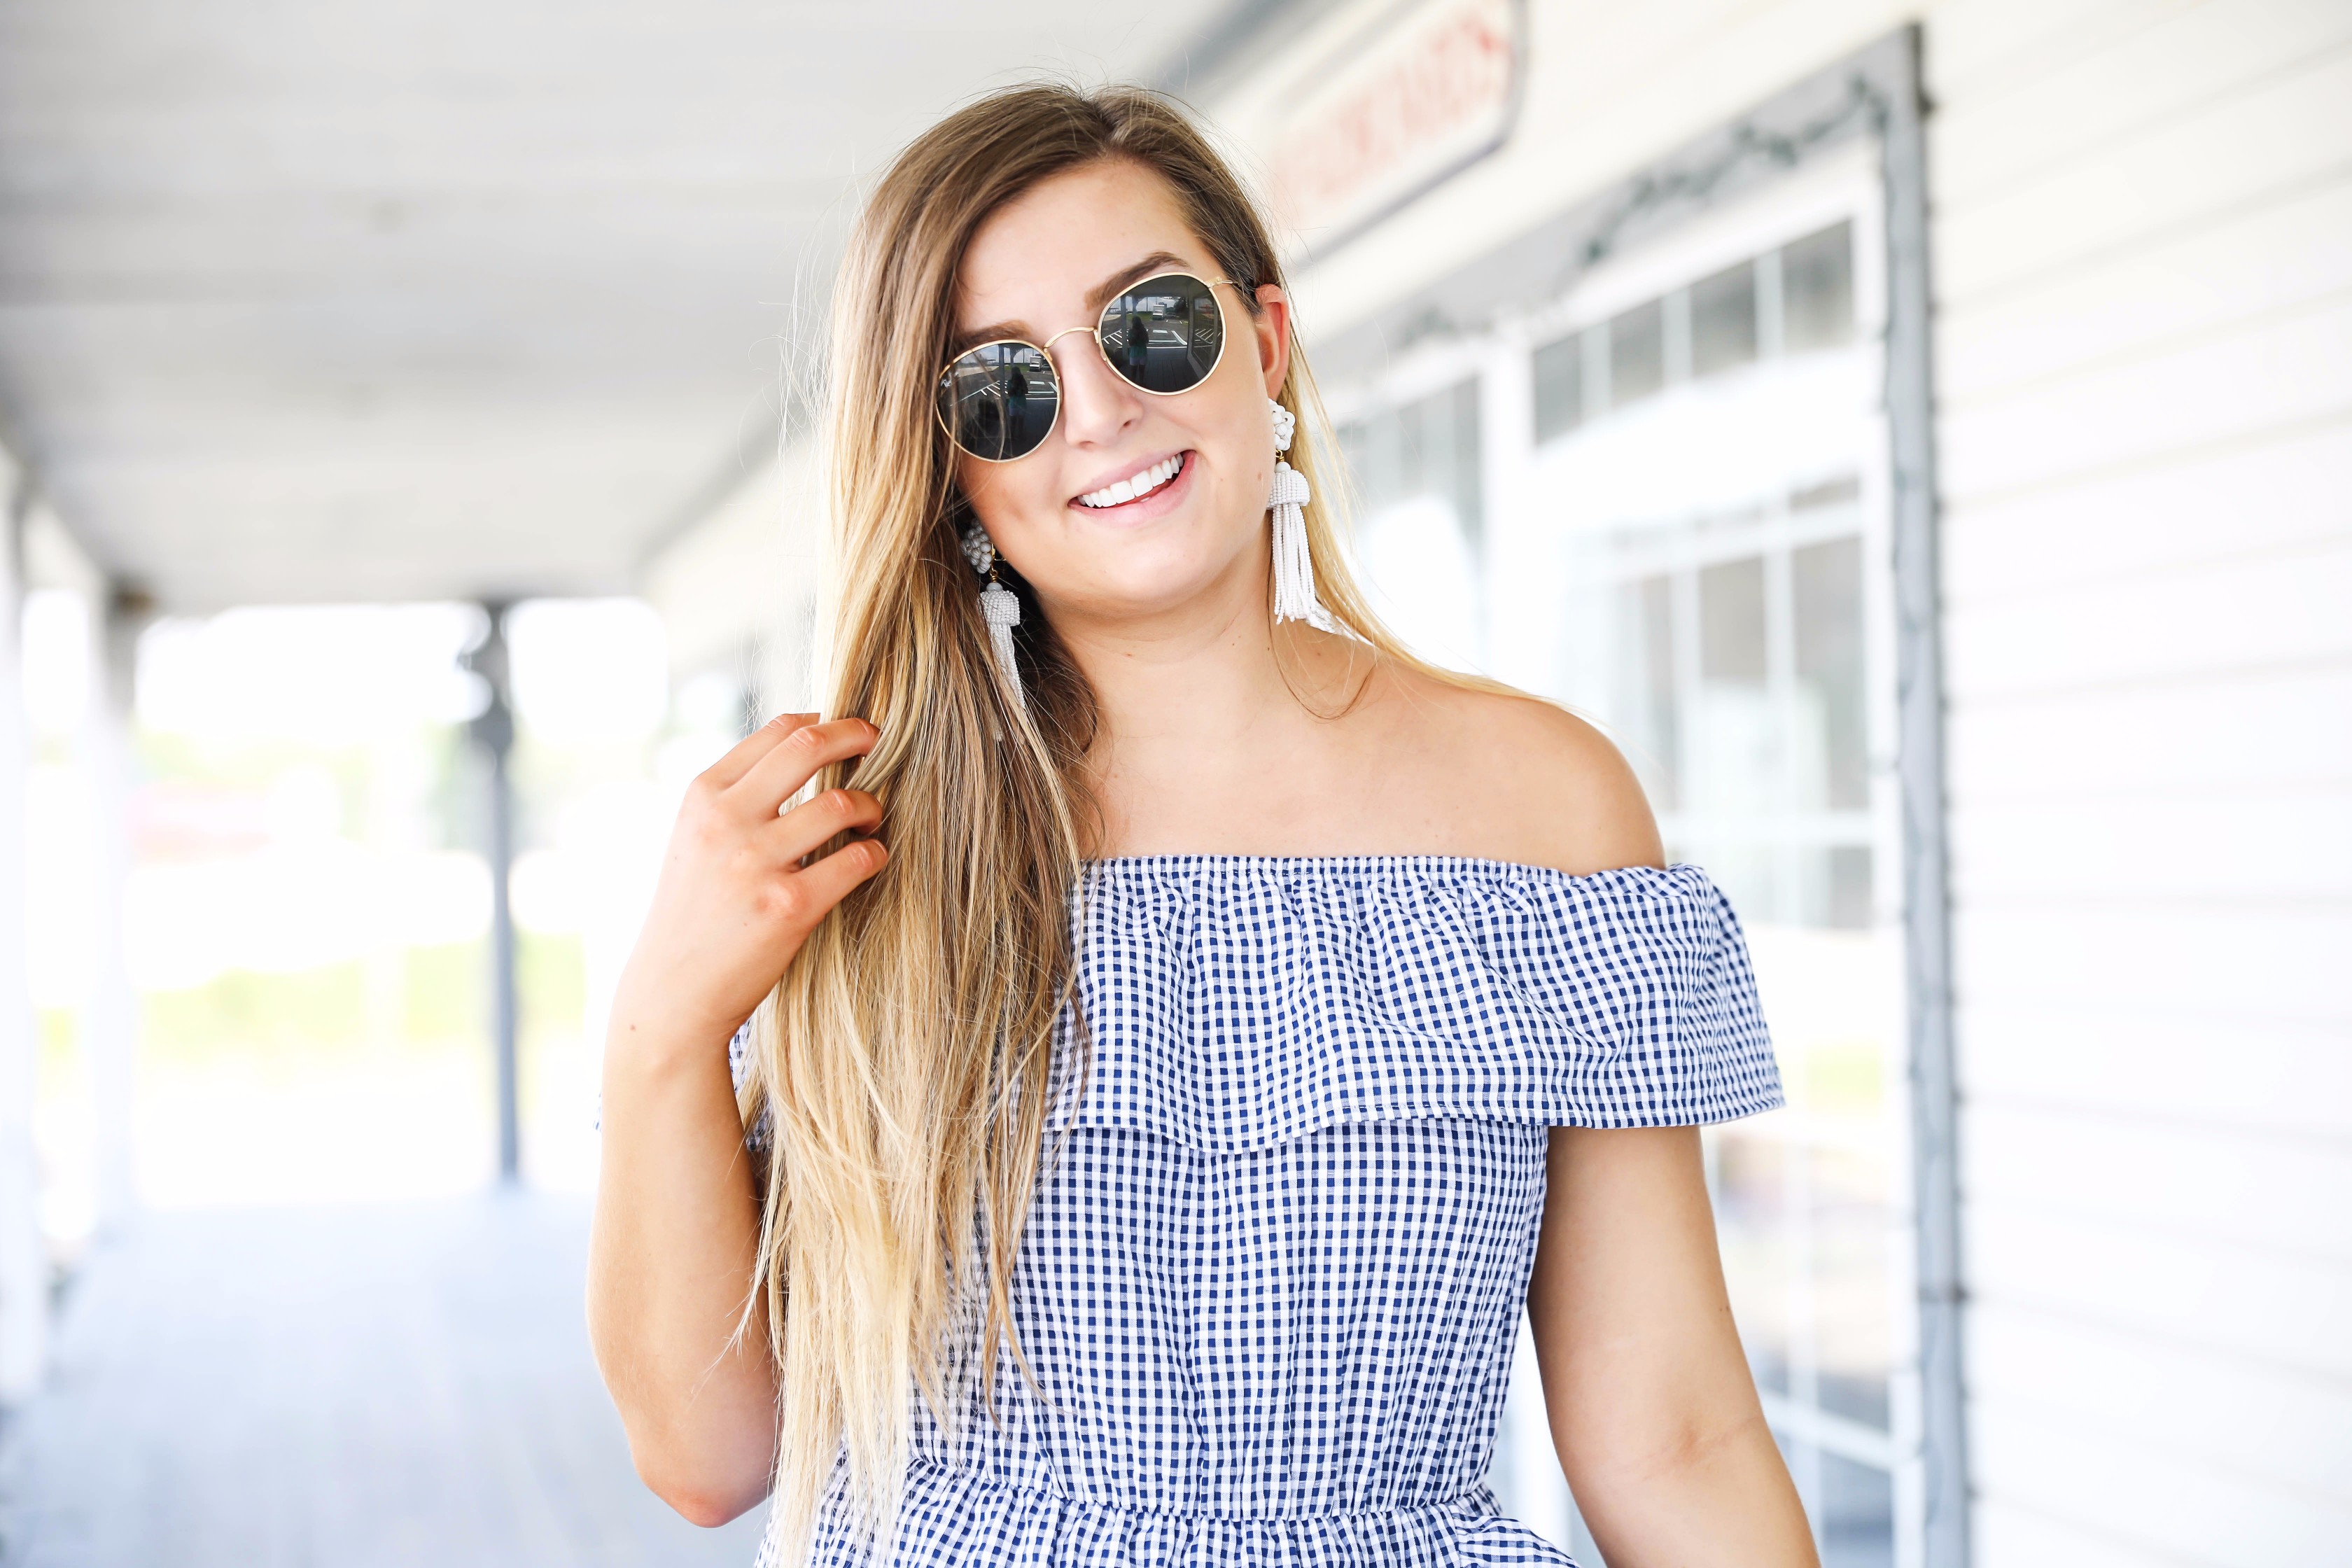 Gingham ruffle dress and round rayb ban sunglasses with tassel earrings on fashion blog daily dose of charm by lauren lindmark